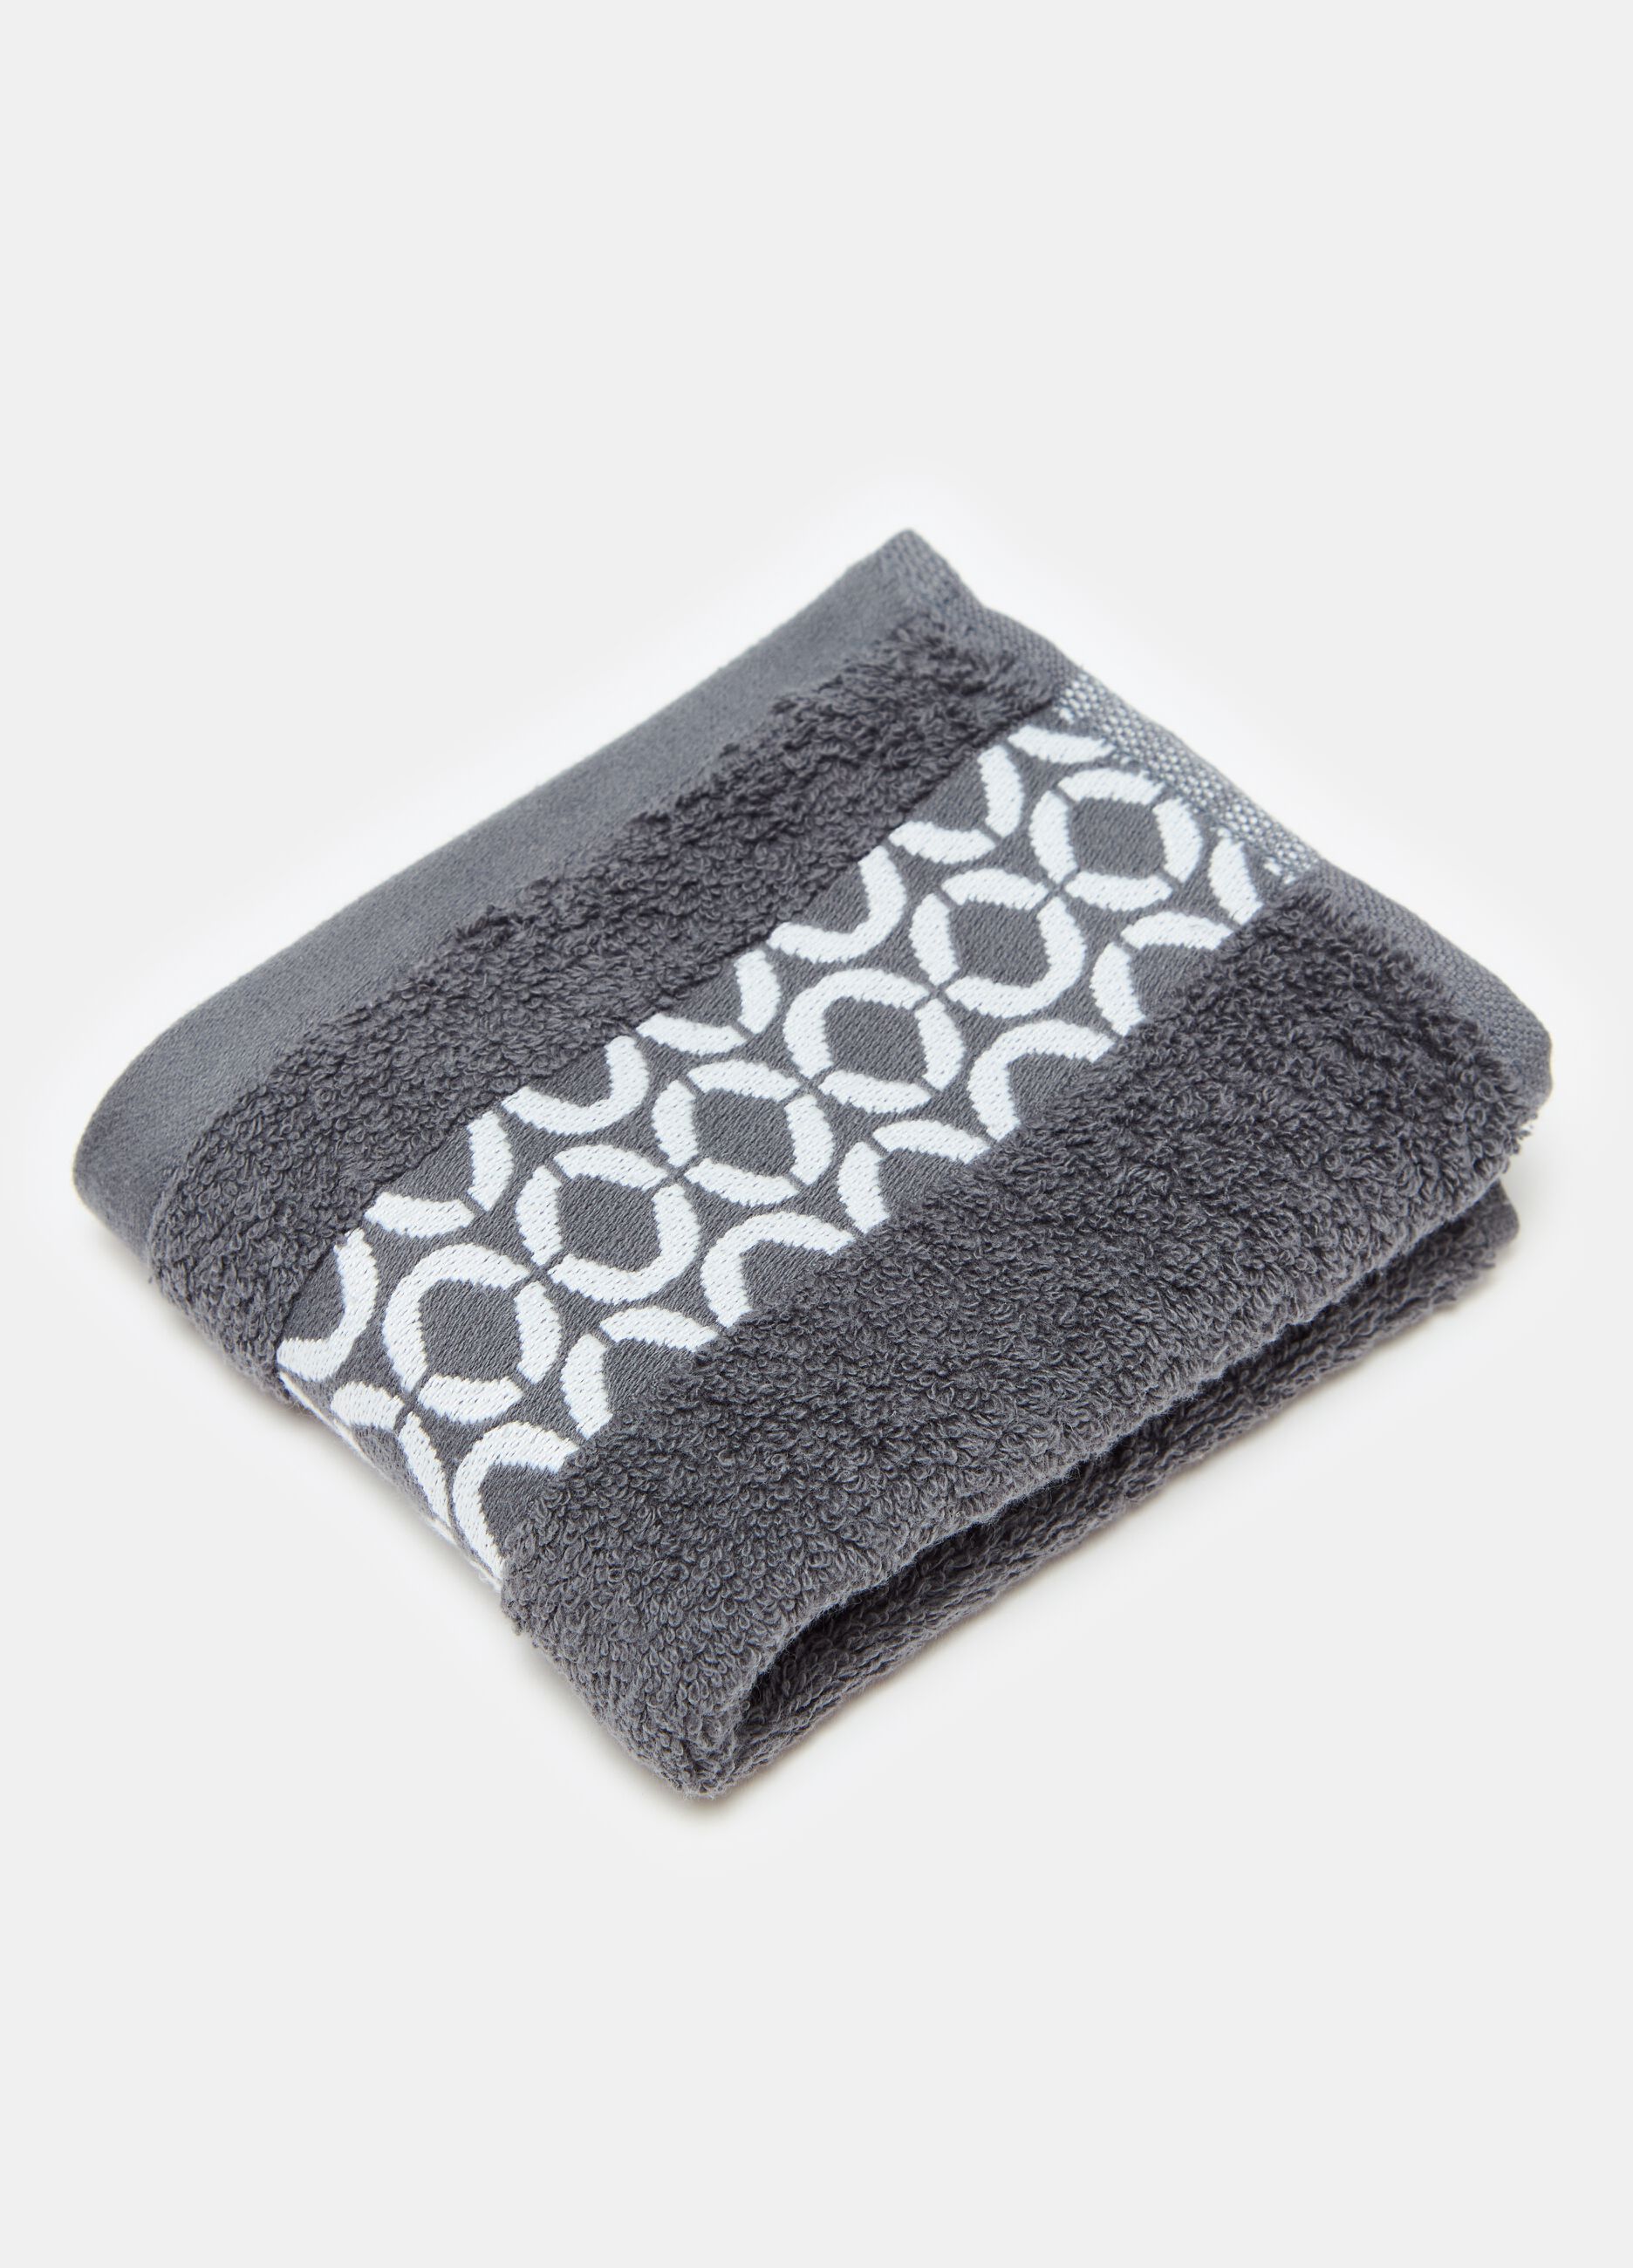 Guest towel with dots patterned trim